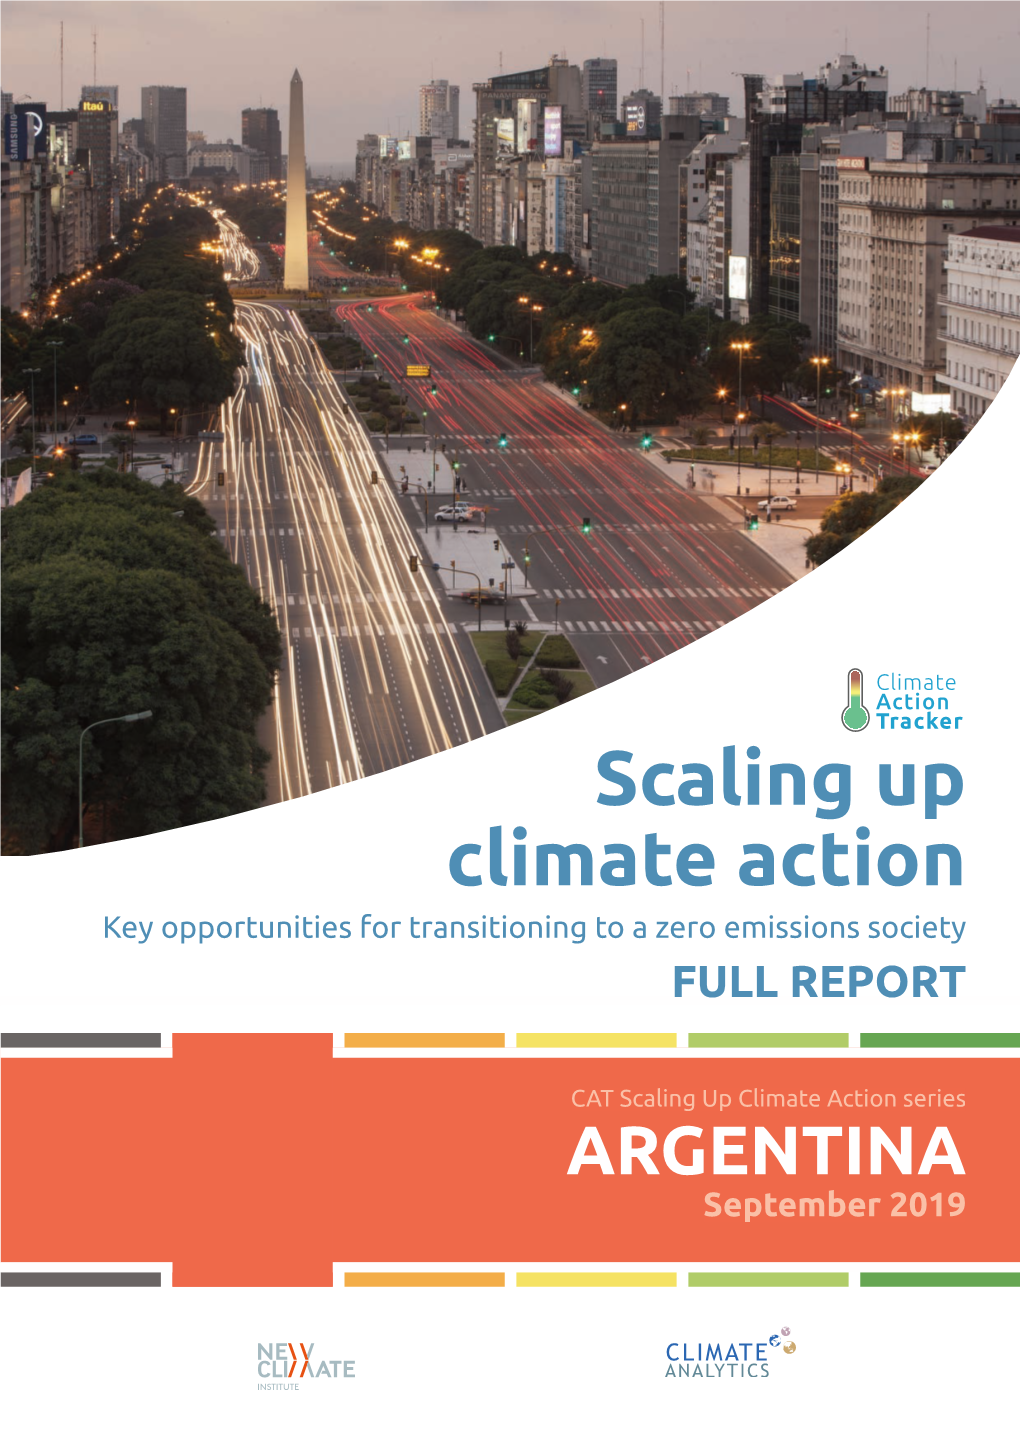 ARGENTINA September 2019 CAT Scaling up Climate Action Series